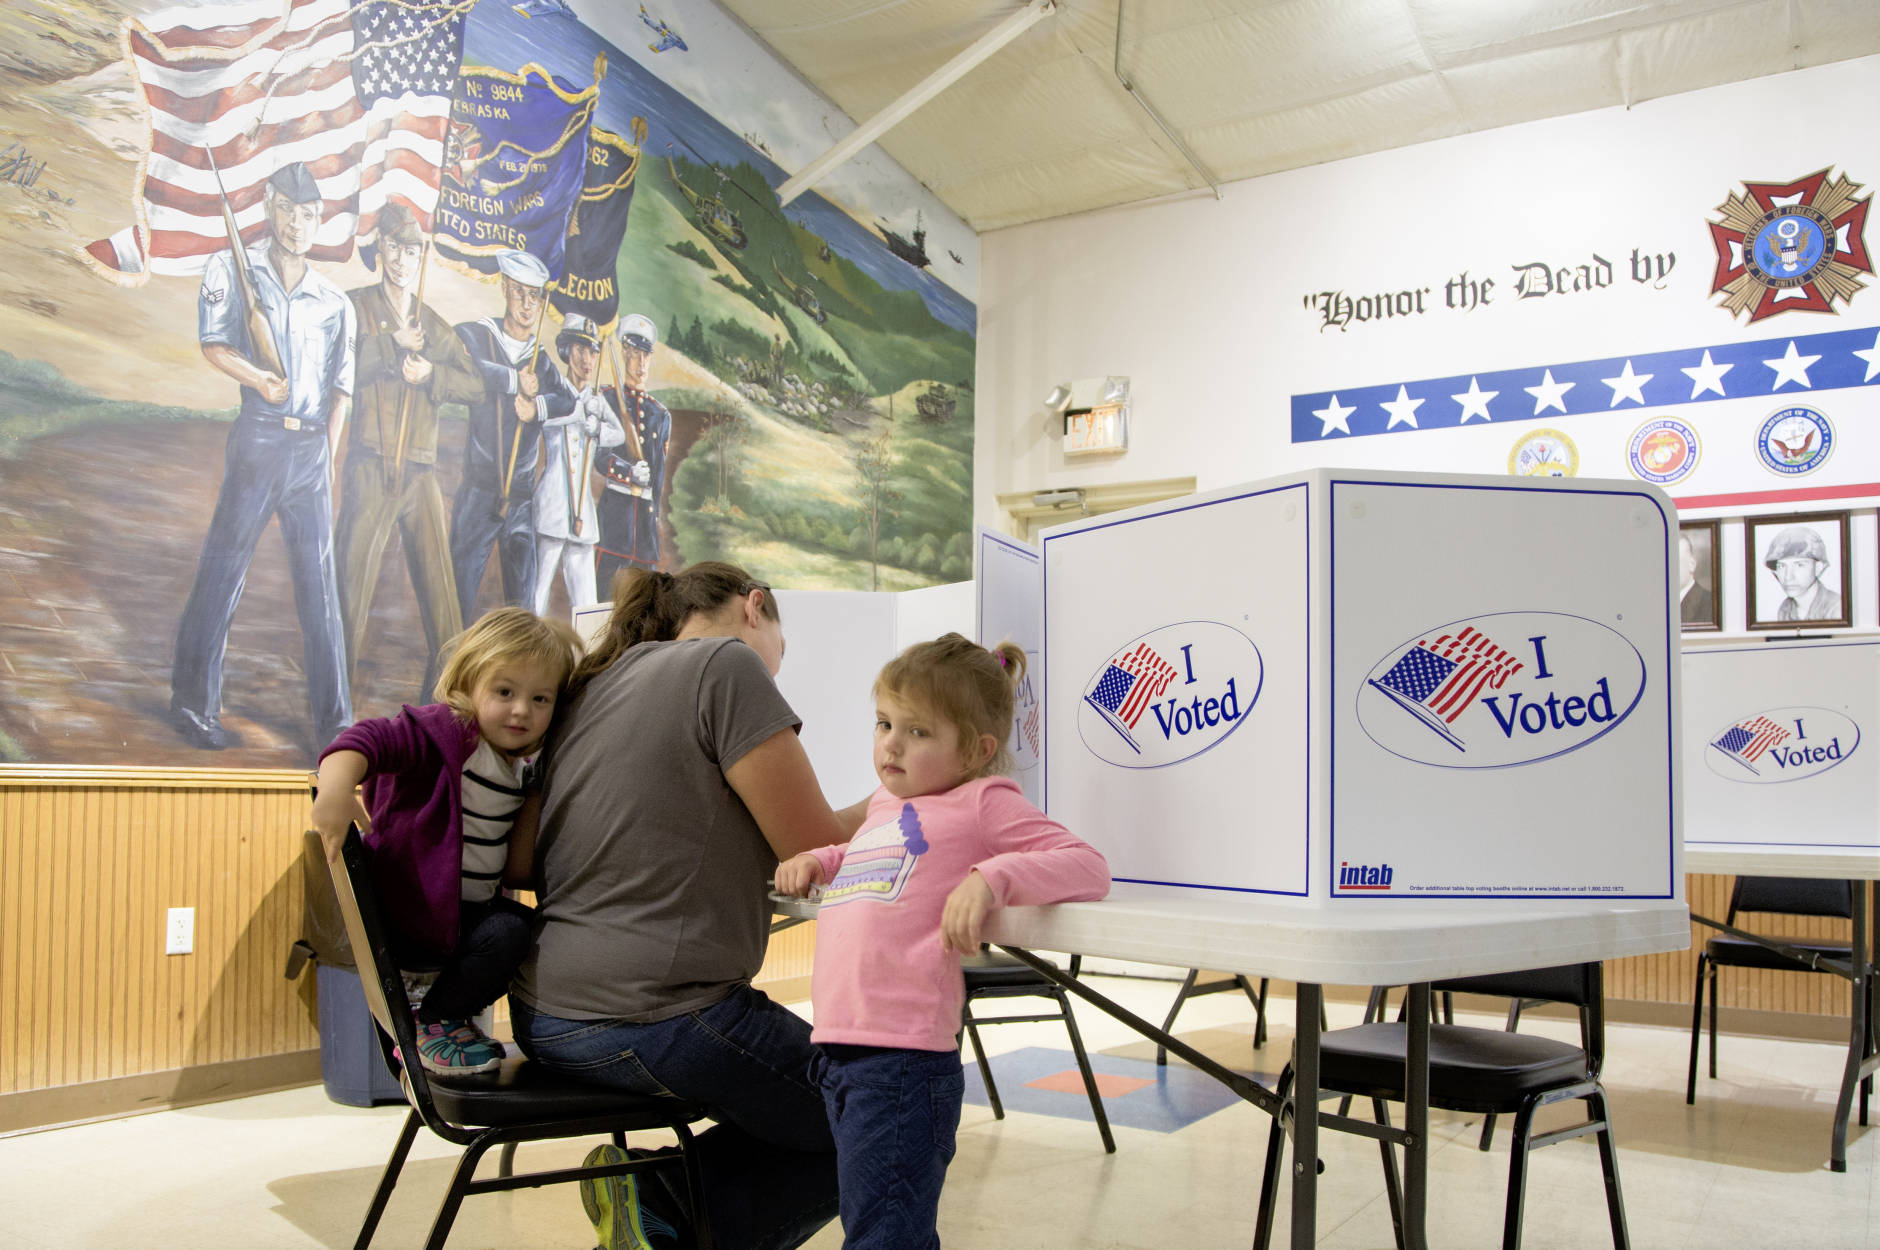 Michaela Case is accompanied by her daughters Emma, 4, right, and Jessie, 2, as she fills out her ballot at a polling station on election day in Yutan, Neb., Tuesday, Nov. 8, 2016. (AP Photo/Nati Harnik)